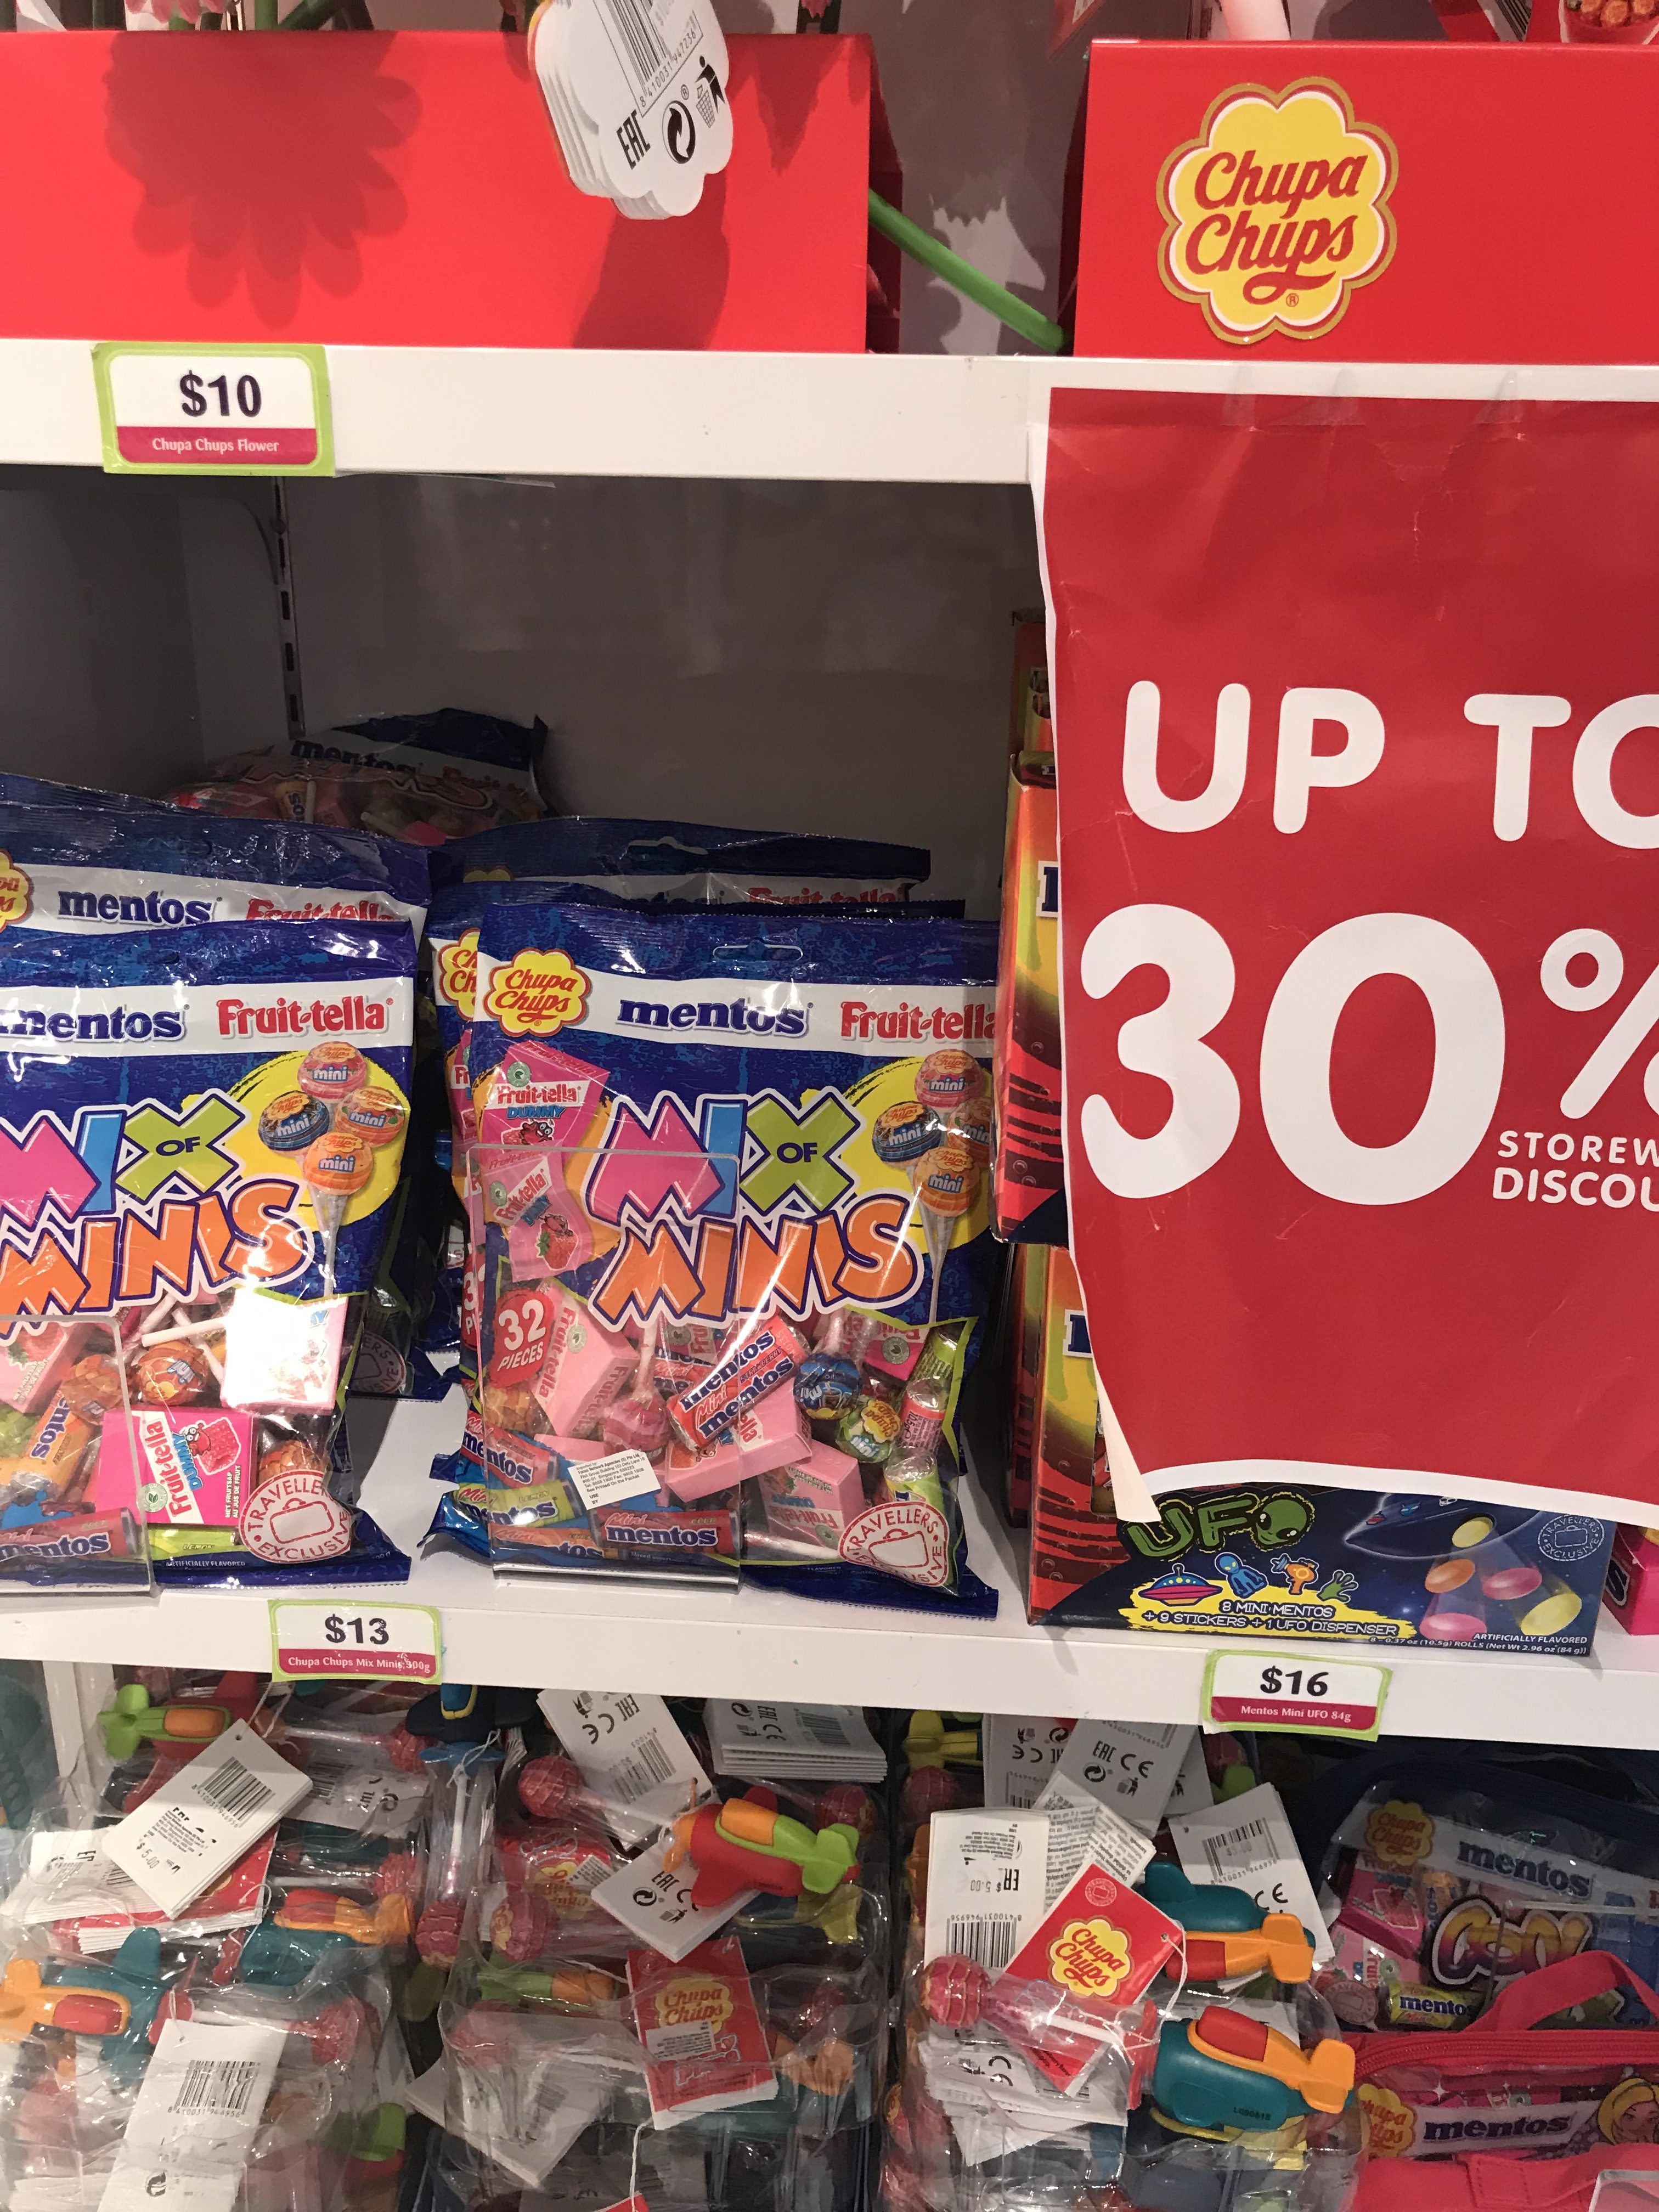 Candylicious to close at VivoCity, offers up to 50% off chocolates, candies and snacks! - 11